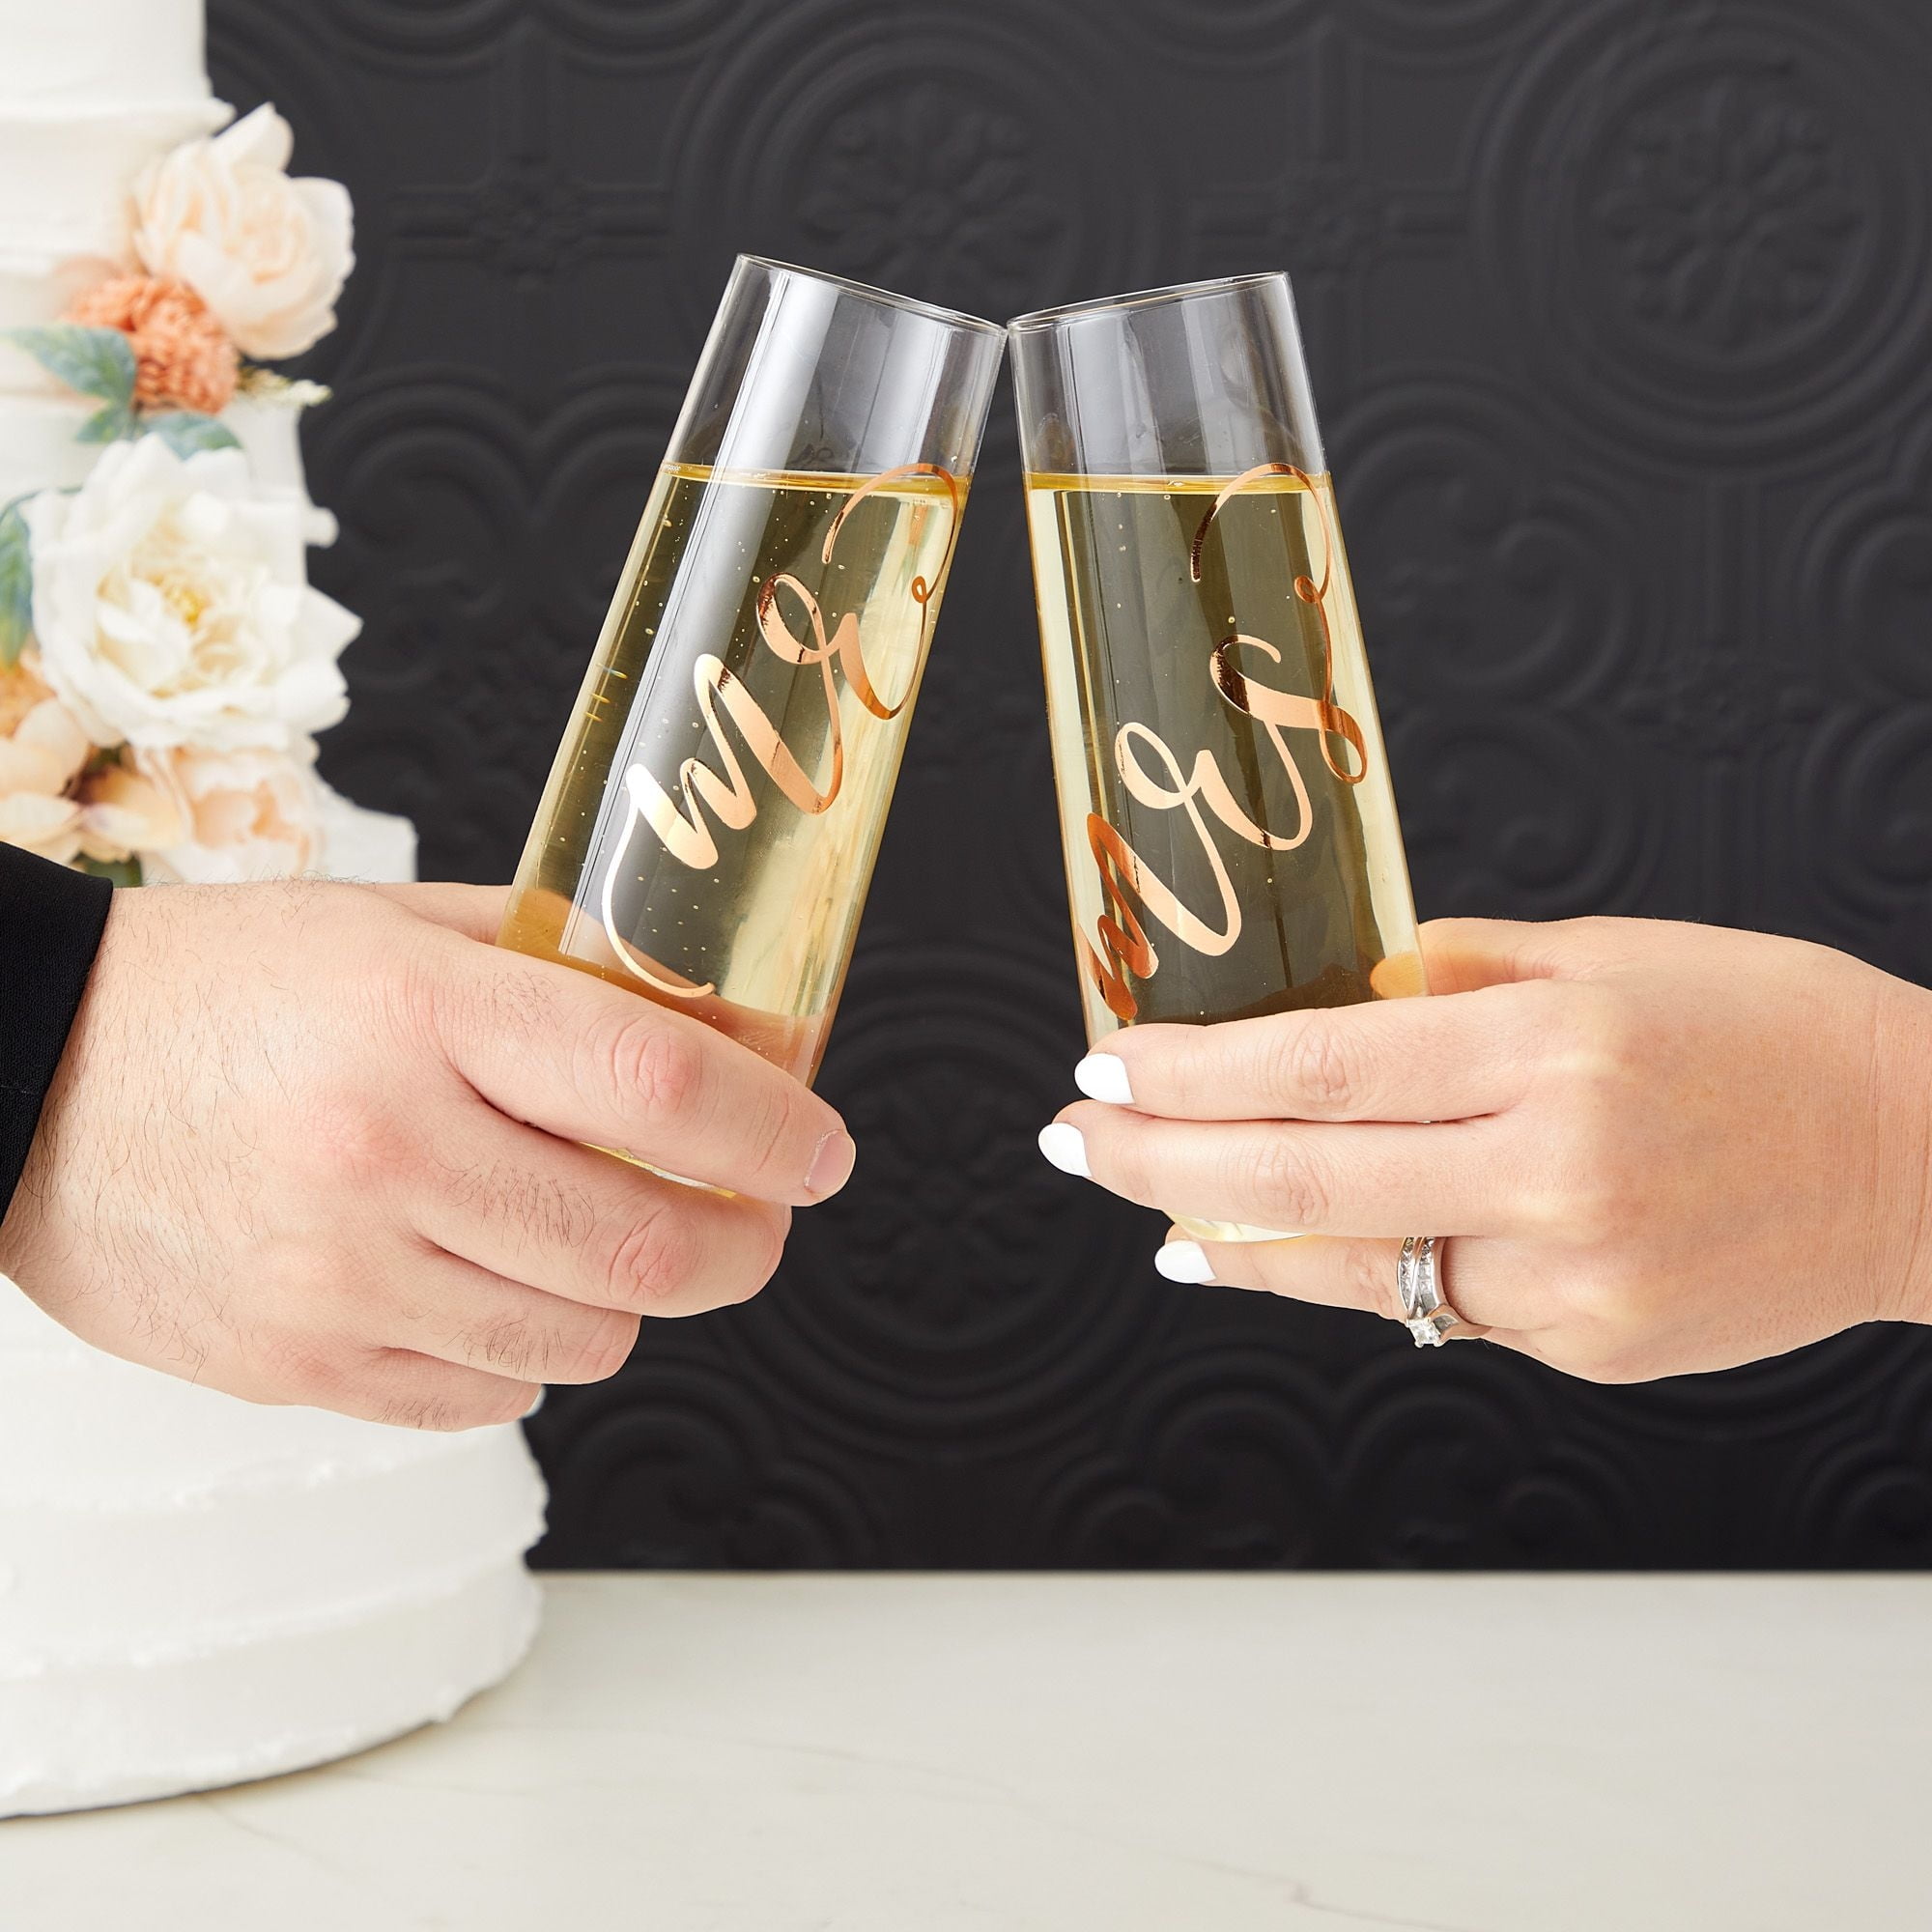 10th Wedding Anniversary Gifts for Couple Wedding Champagne Flutes Gold  Bridal Shower Gifts Personalized Toasting Glasses Gifts for Parents 